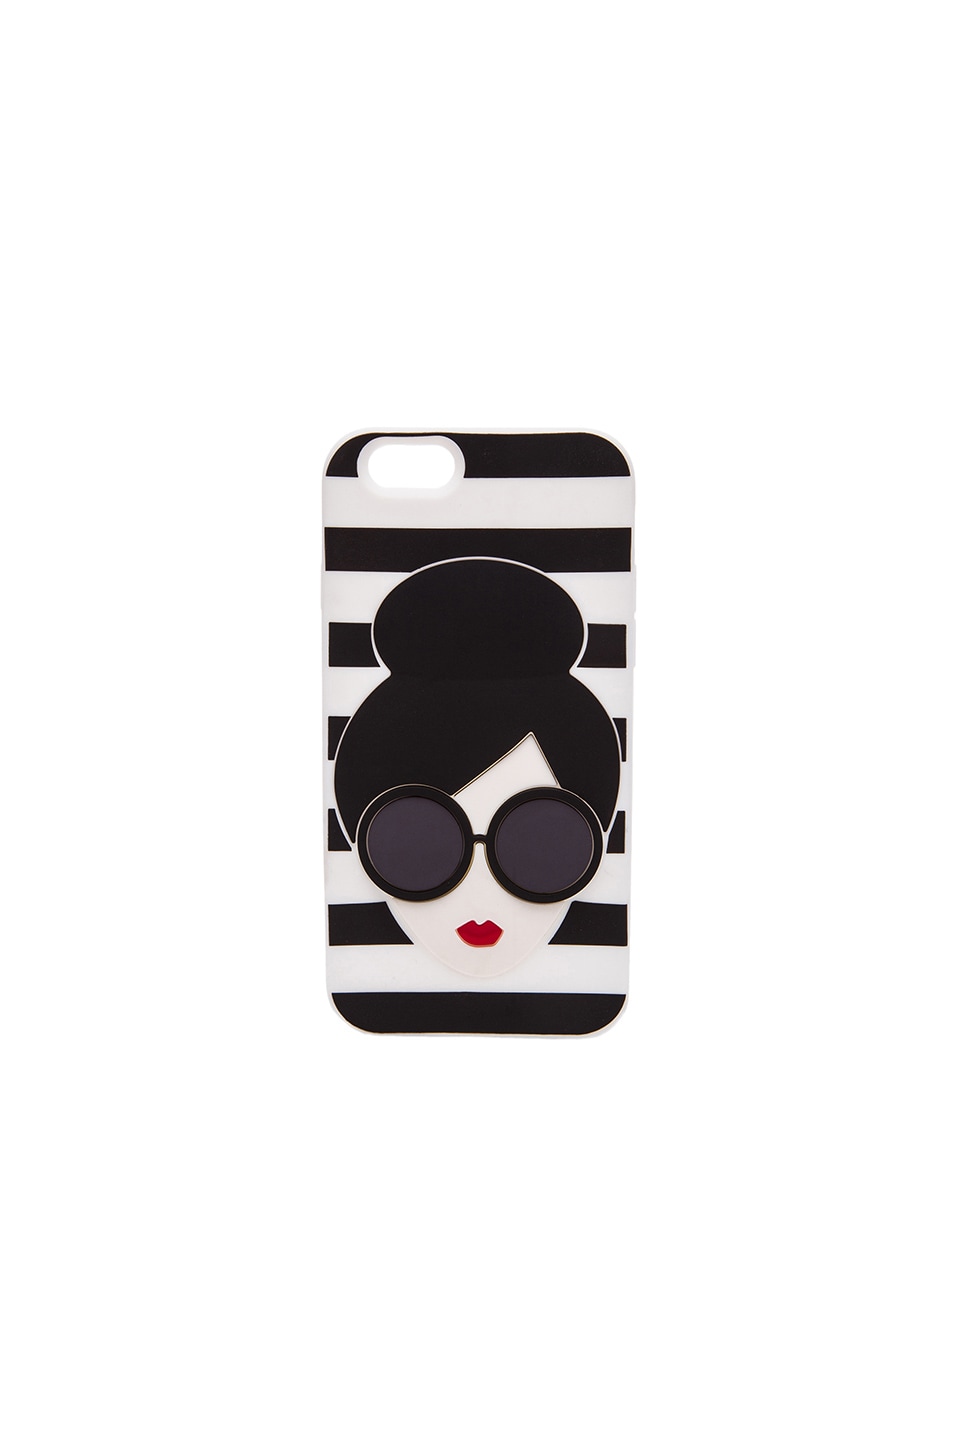 Alice Olivia Stacey Face Iphone 6 ケース Black White Revolve